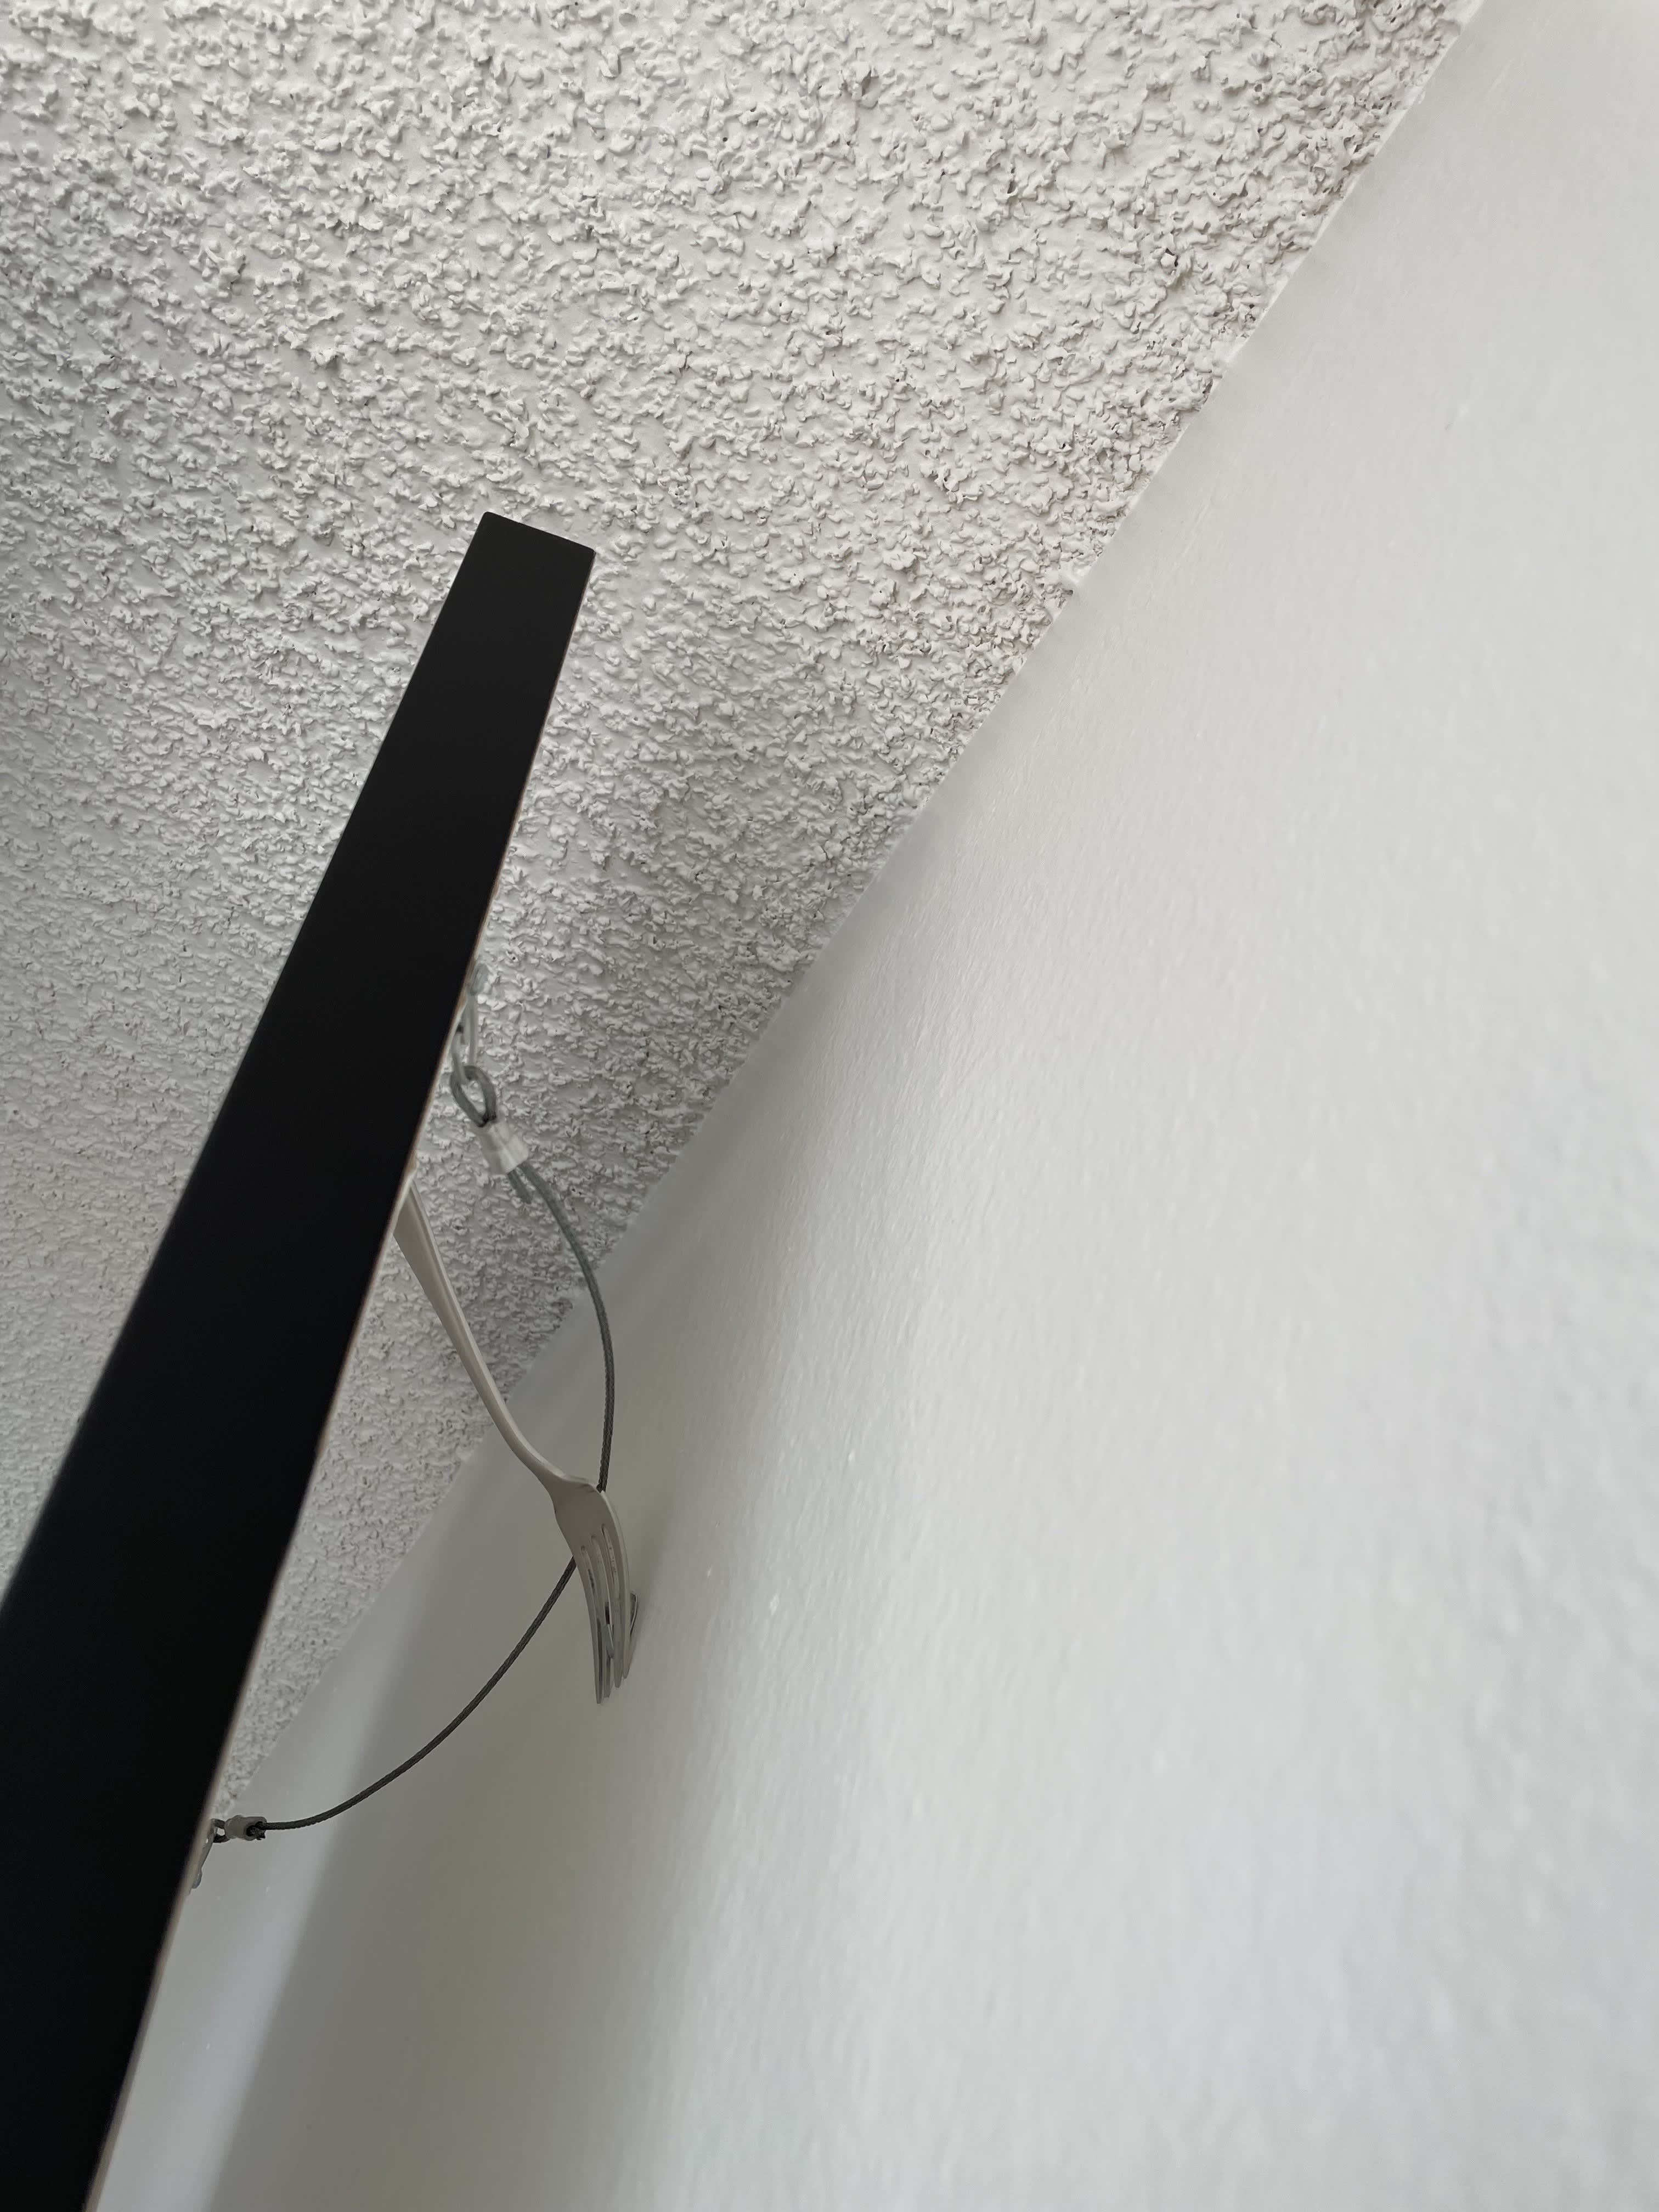 Try This Super Easy Hack for Hanging Pictures With a Fork